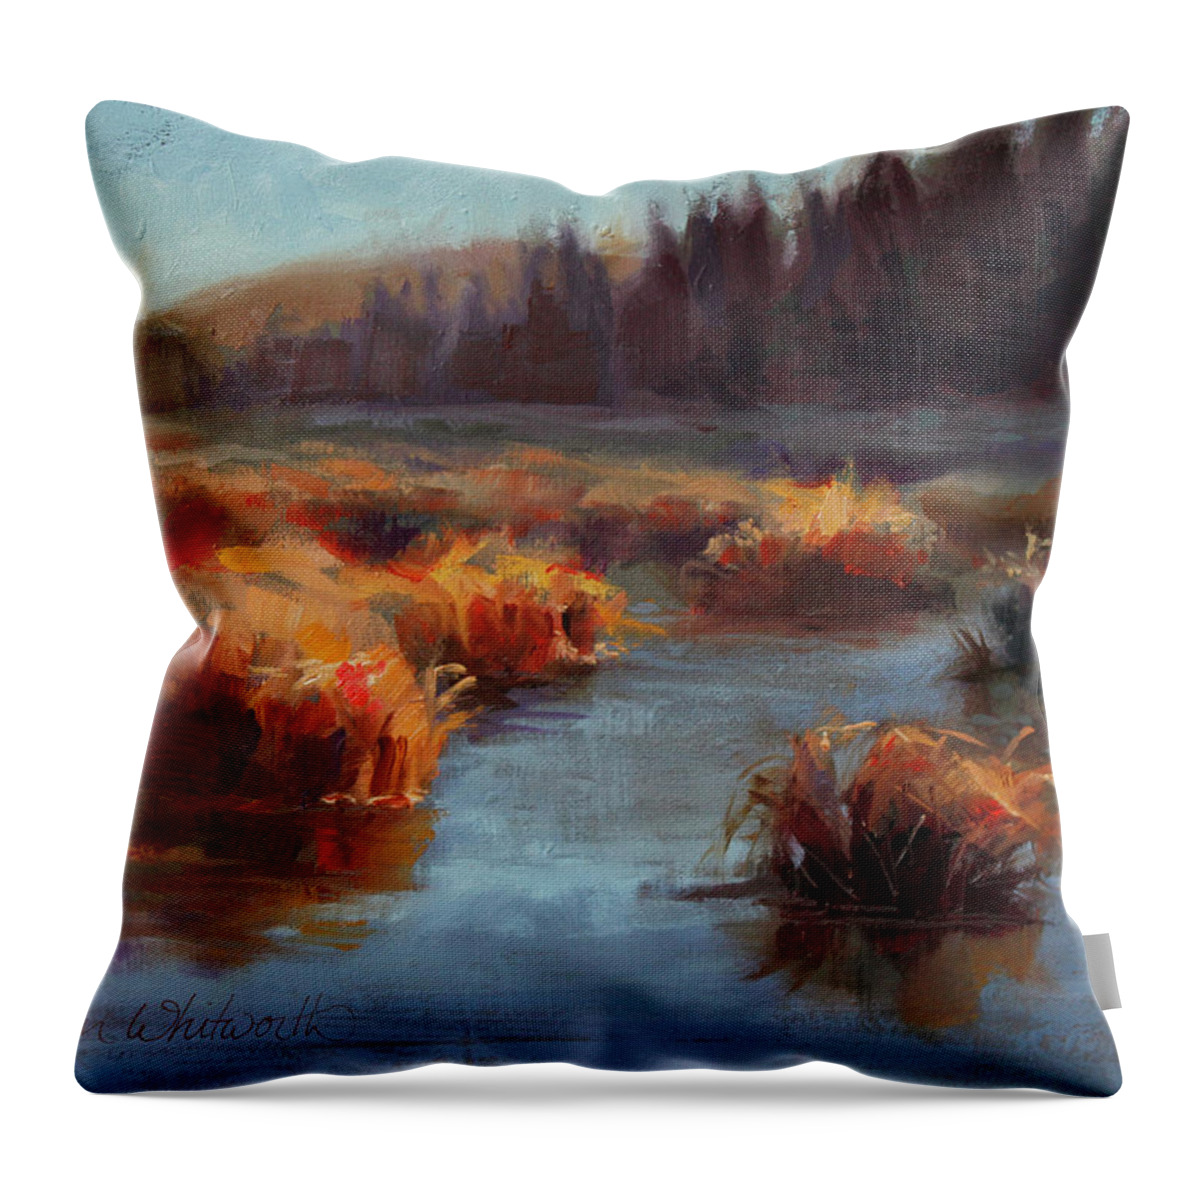 Landscape Throw Pillow featuring the painting Misty Autumn Meadow With Creek and Grass - Landscape Painting From Alaska by K Whitworth